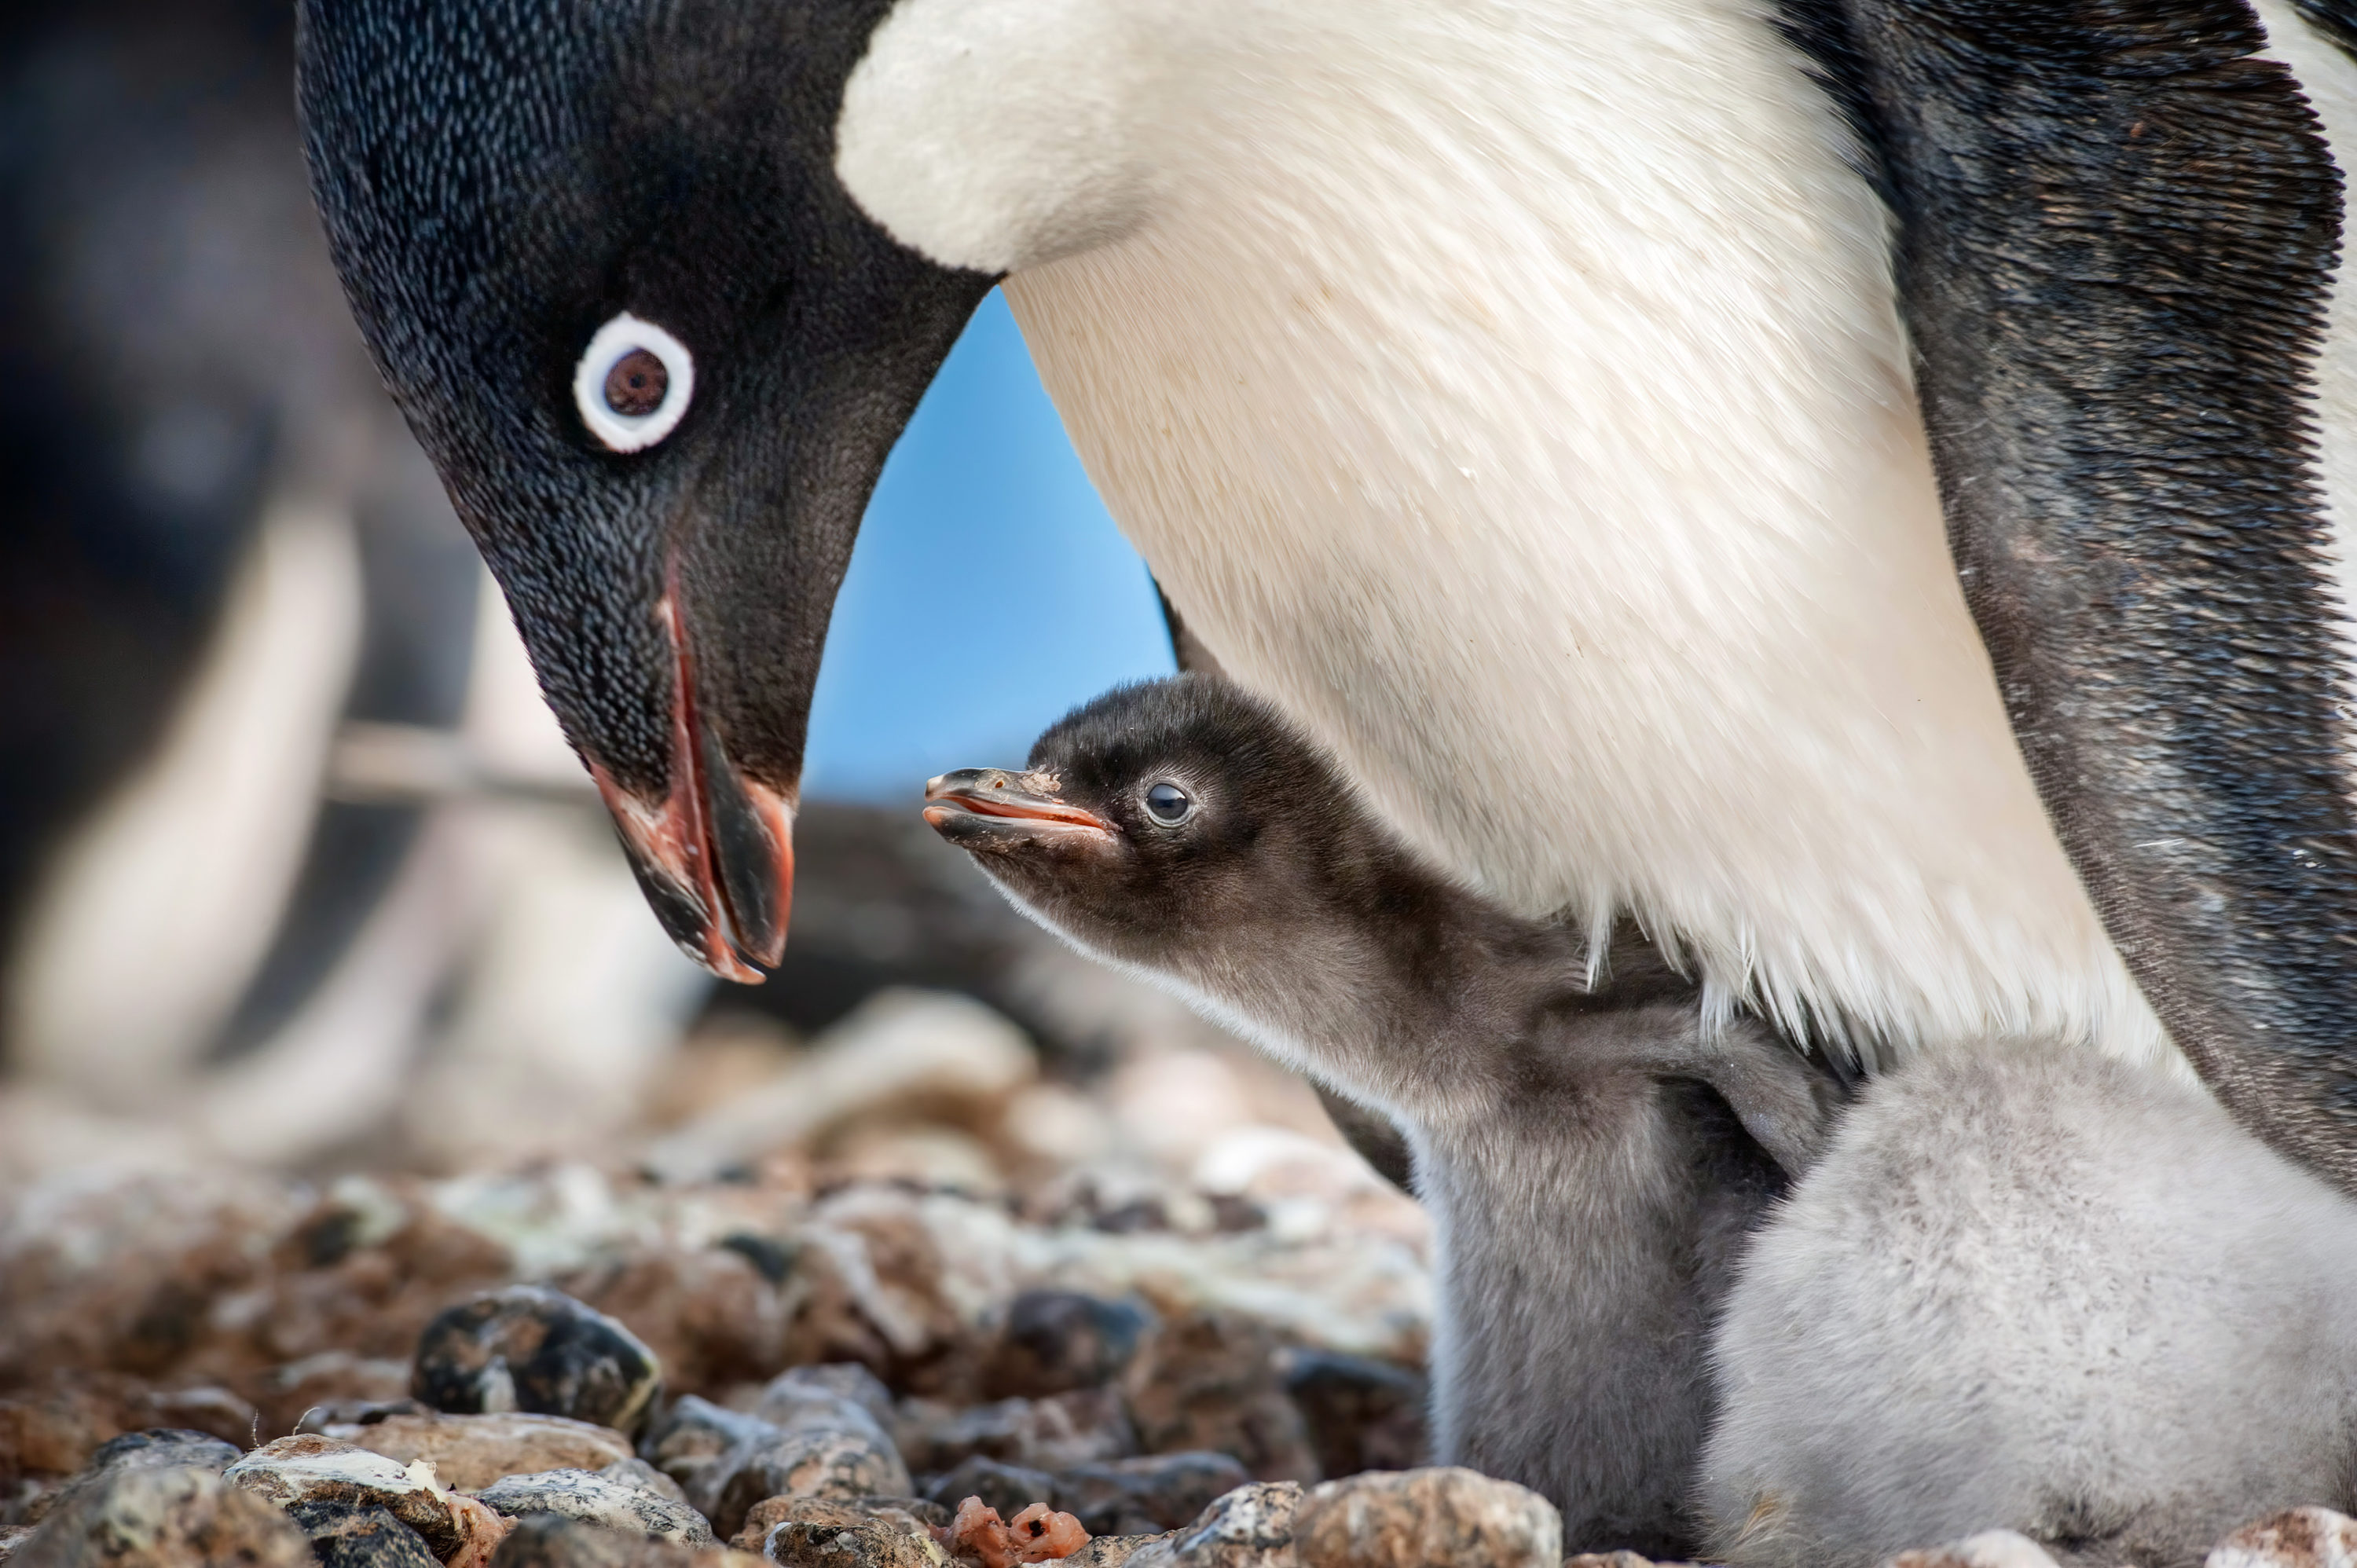 Disneynature Penguins First Week Sales Help Wildlife Conservation Network Protect Penguins Around the Globe